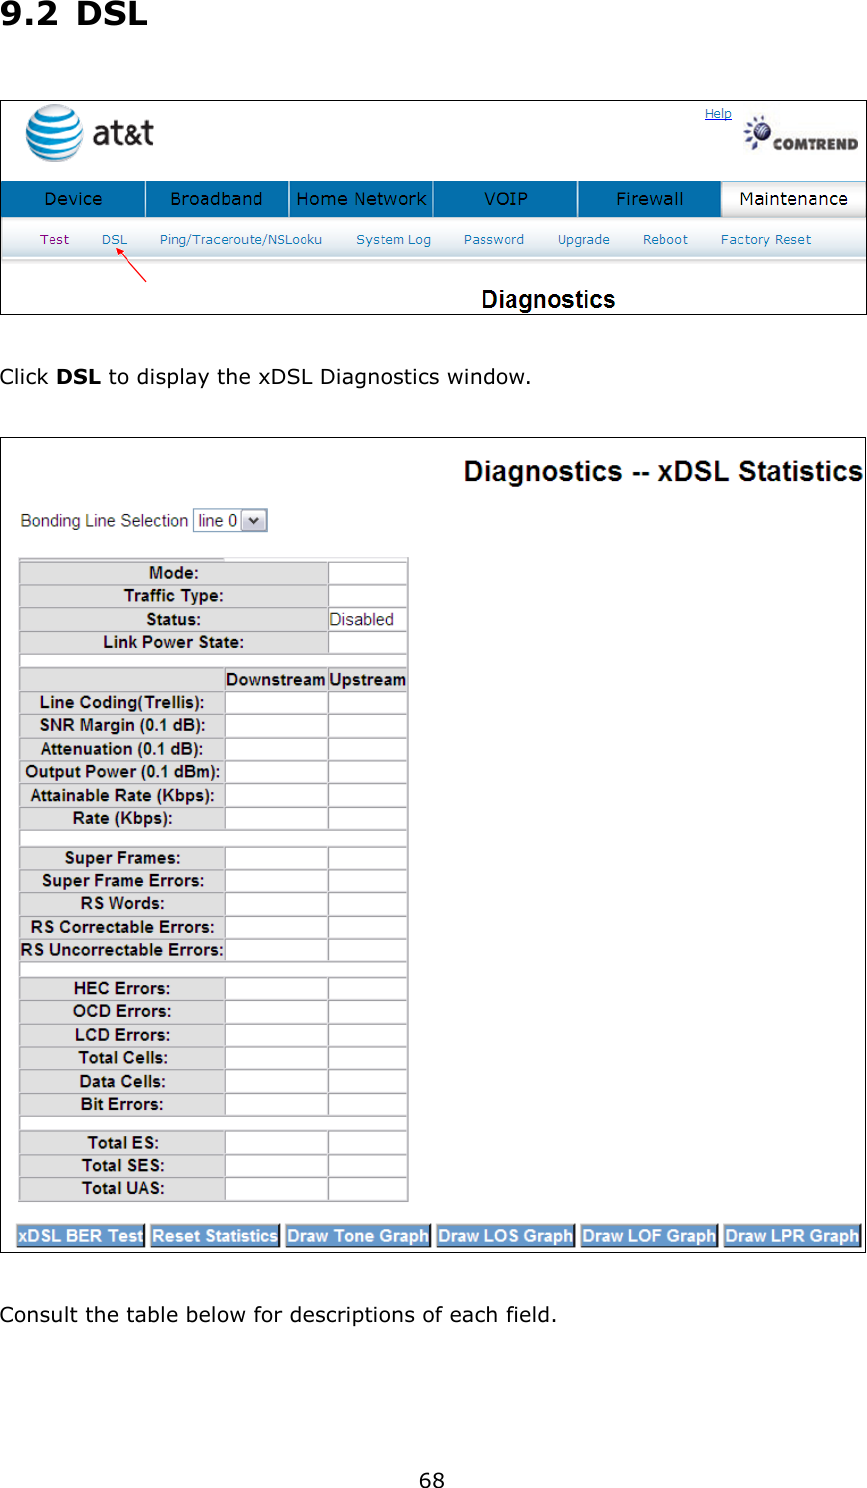 68 9.2  DSL    Click DSL to display the xDSL Diagnostics window.    Consult the table below for descriptions of each field.    